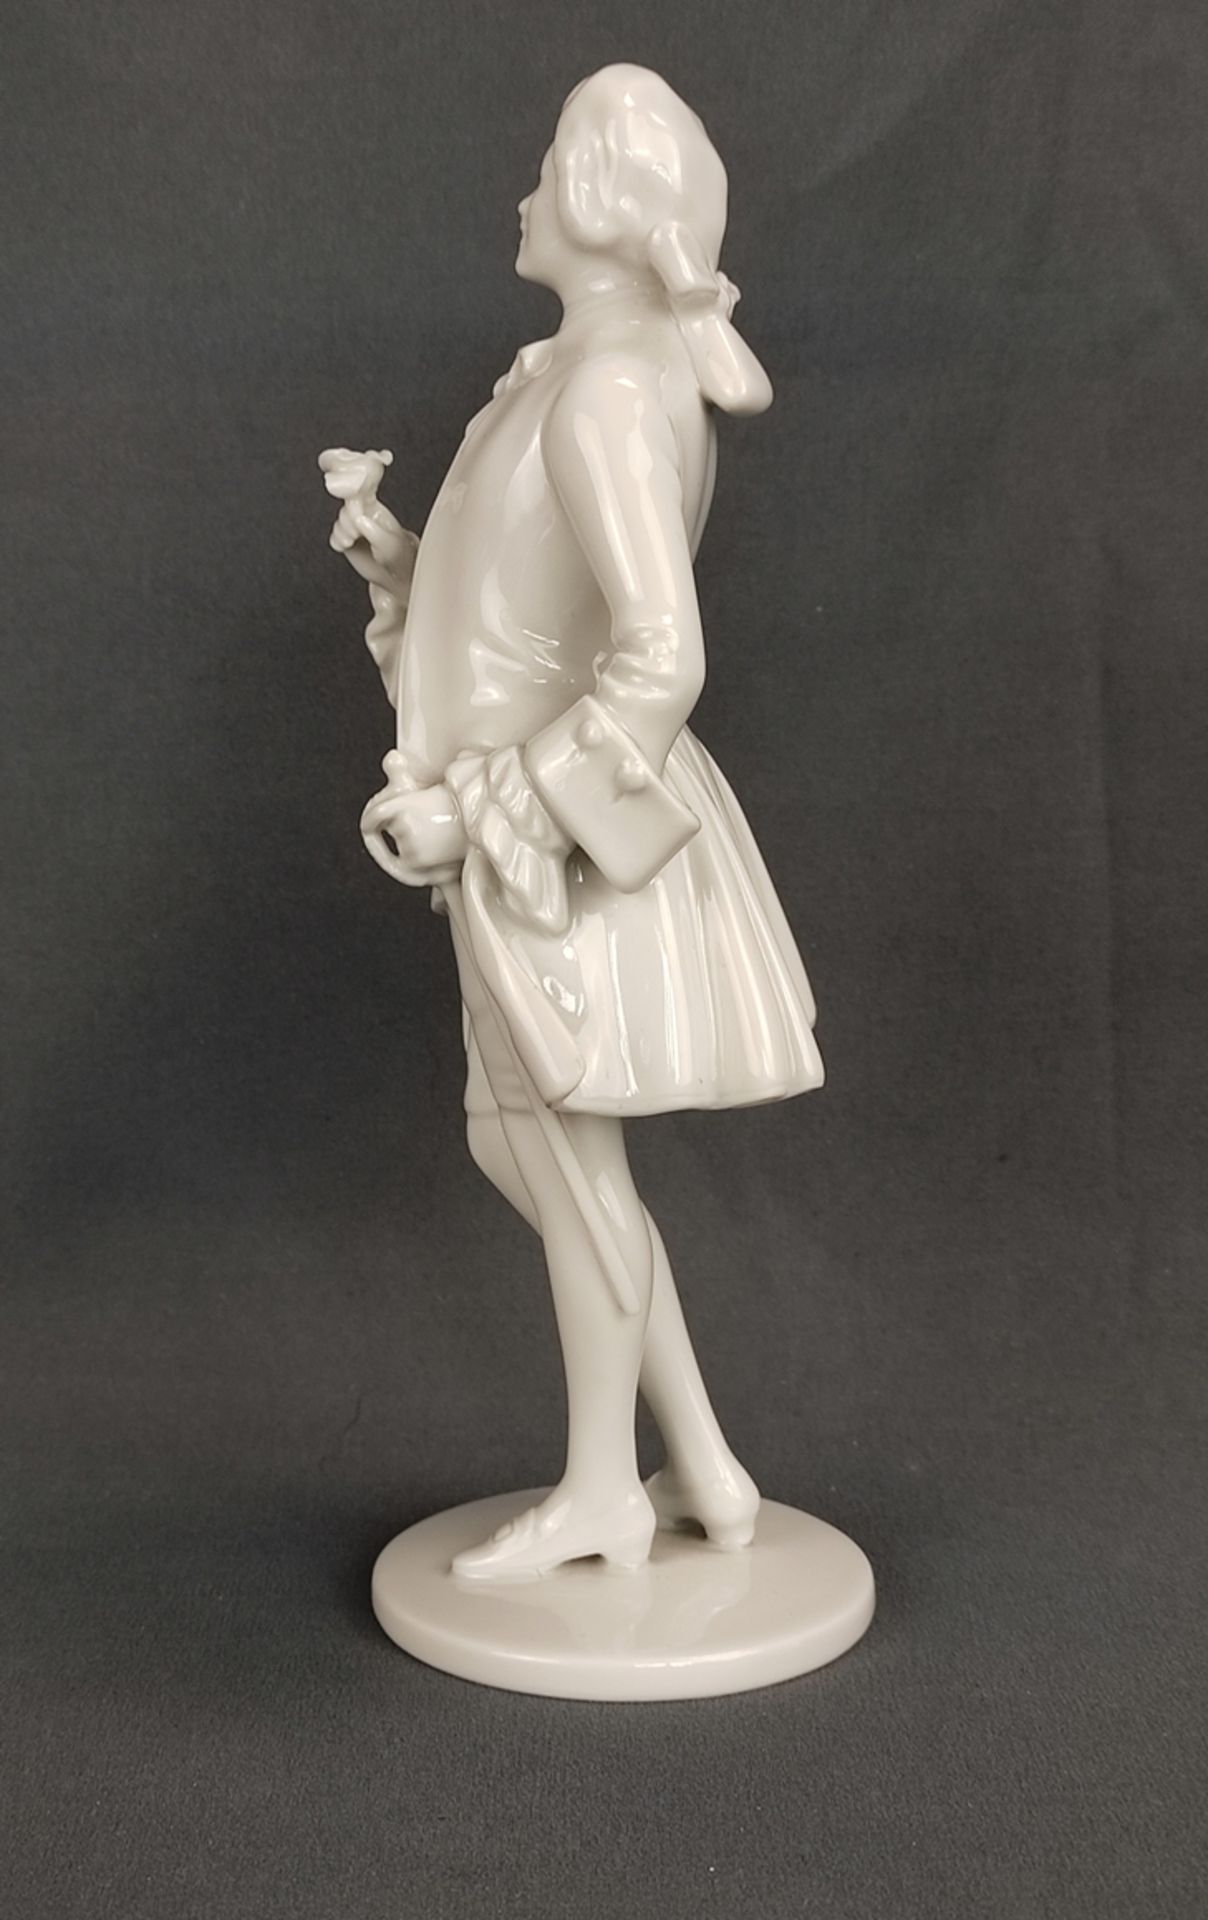 Cavalier, standing on disc stand with rose in hand, white porcelain, Augarten Vienna, embossed mark - Image 2 of 5